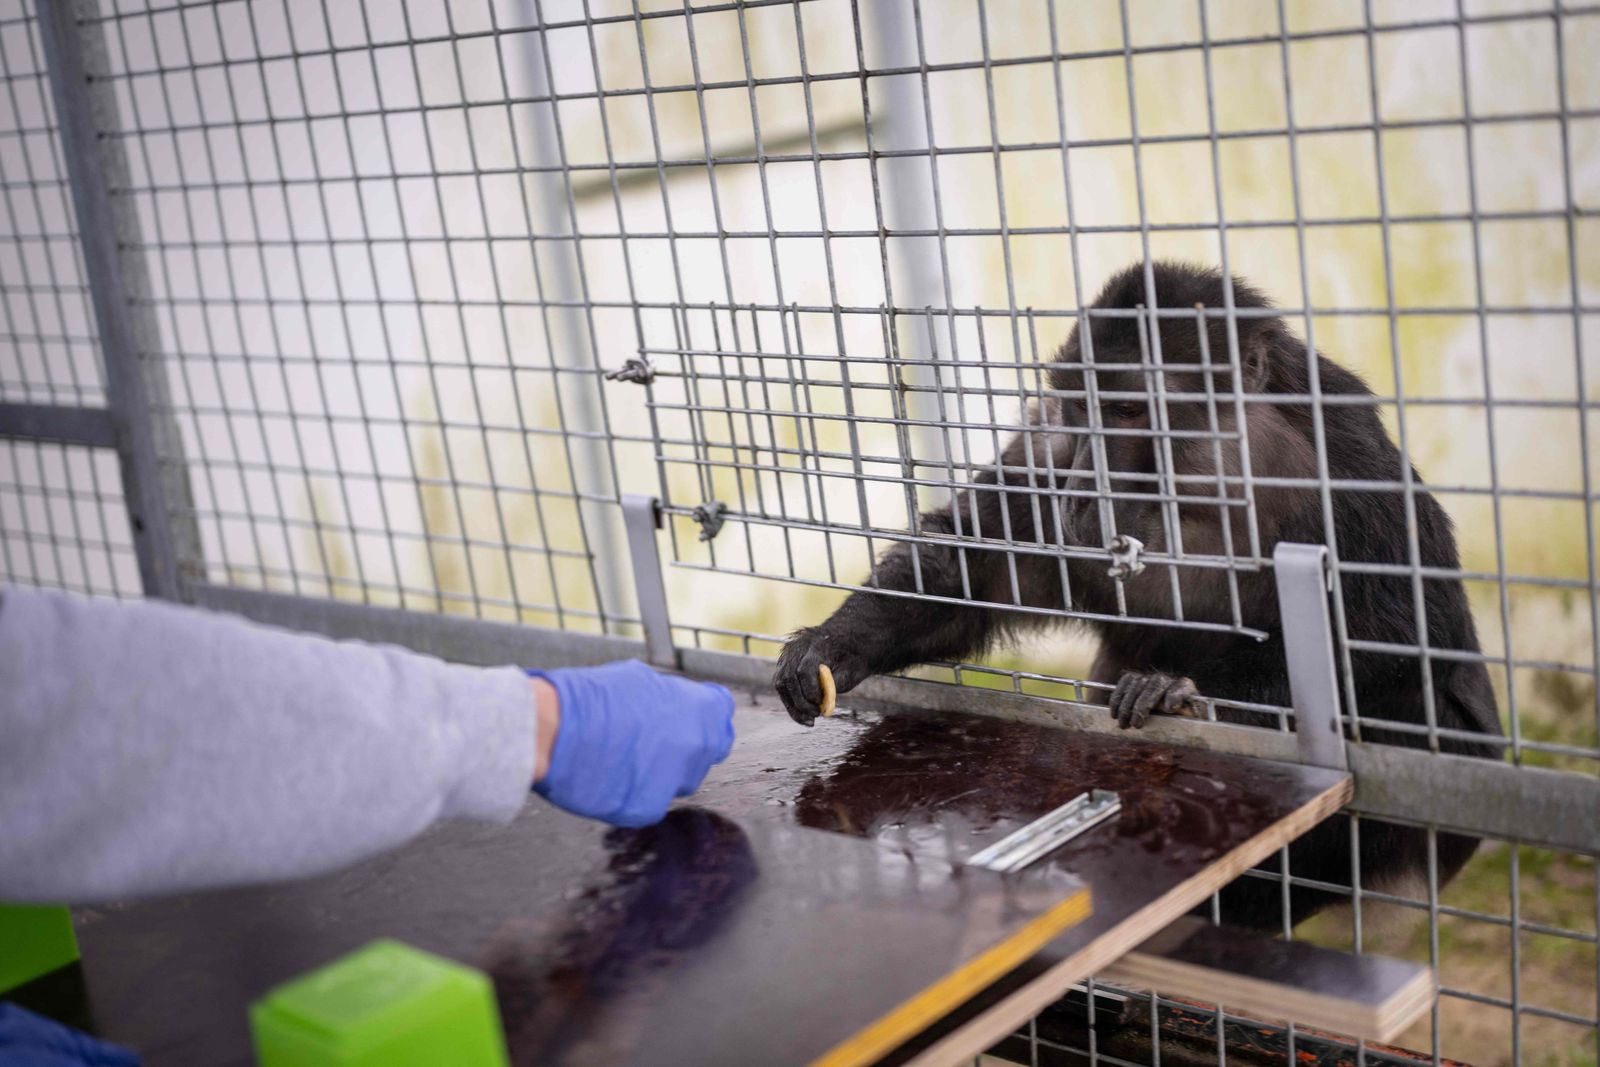 A staff member of primatology centre performs tests on a Token Macaque (Macaca Tonkeana) at the primatology centre of the Strasbourg university, also called Silabe (Simian Laboratory Europe), in Niederhausbergen, eastern France, on May 6, 2024. Strasbourg University's primatology centre which houses primates used for biomedical and behavioral research is under scrutiny by animal rights groups demanding that scientific studies be conducted animal-free. (Photo by SEBASTIEN BOZON / AFP)